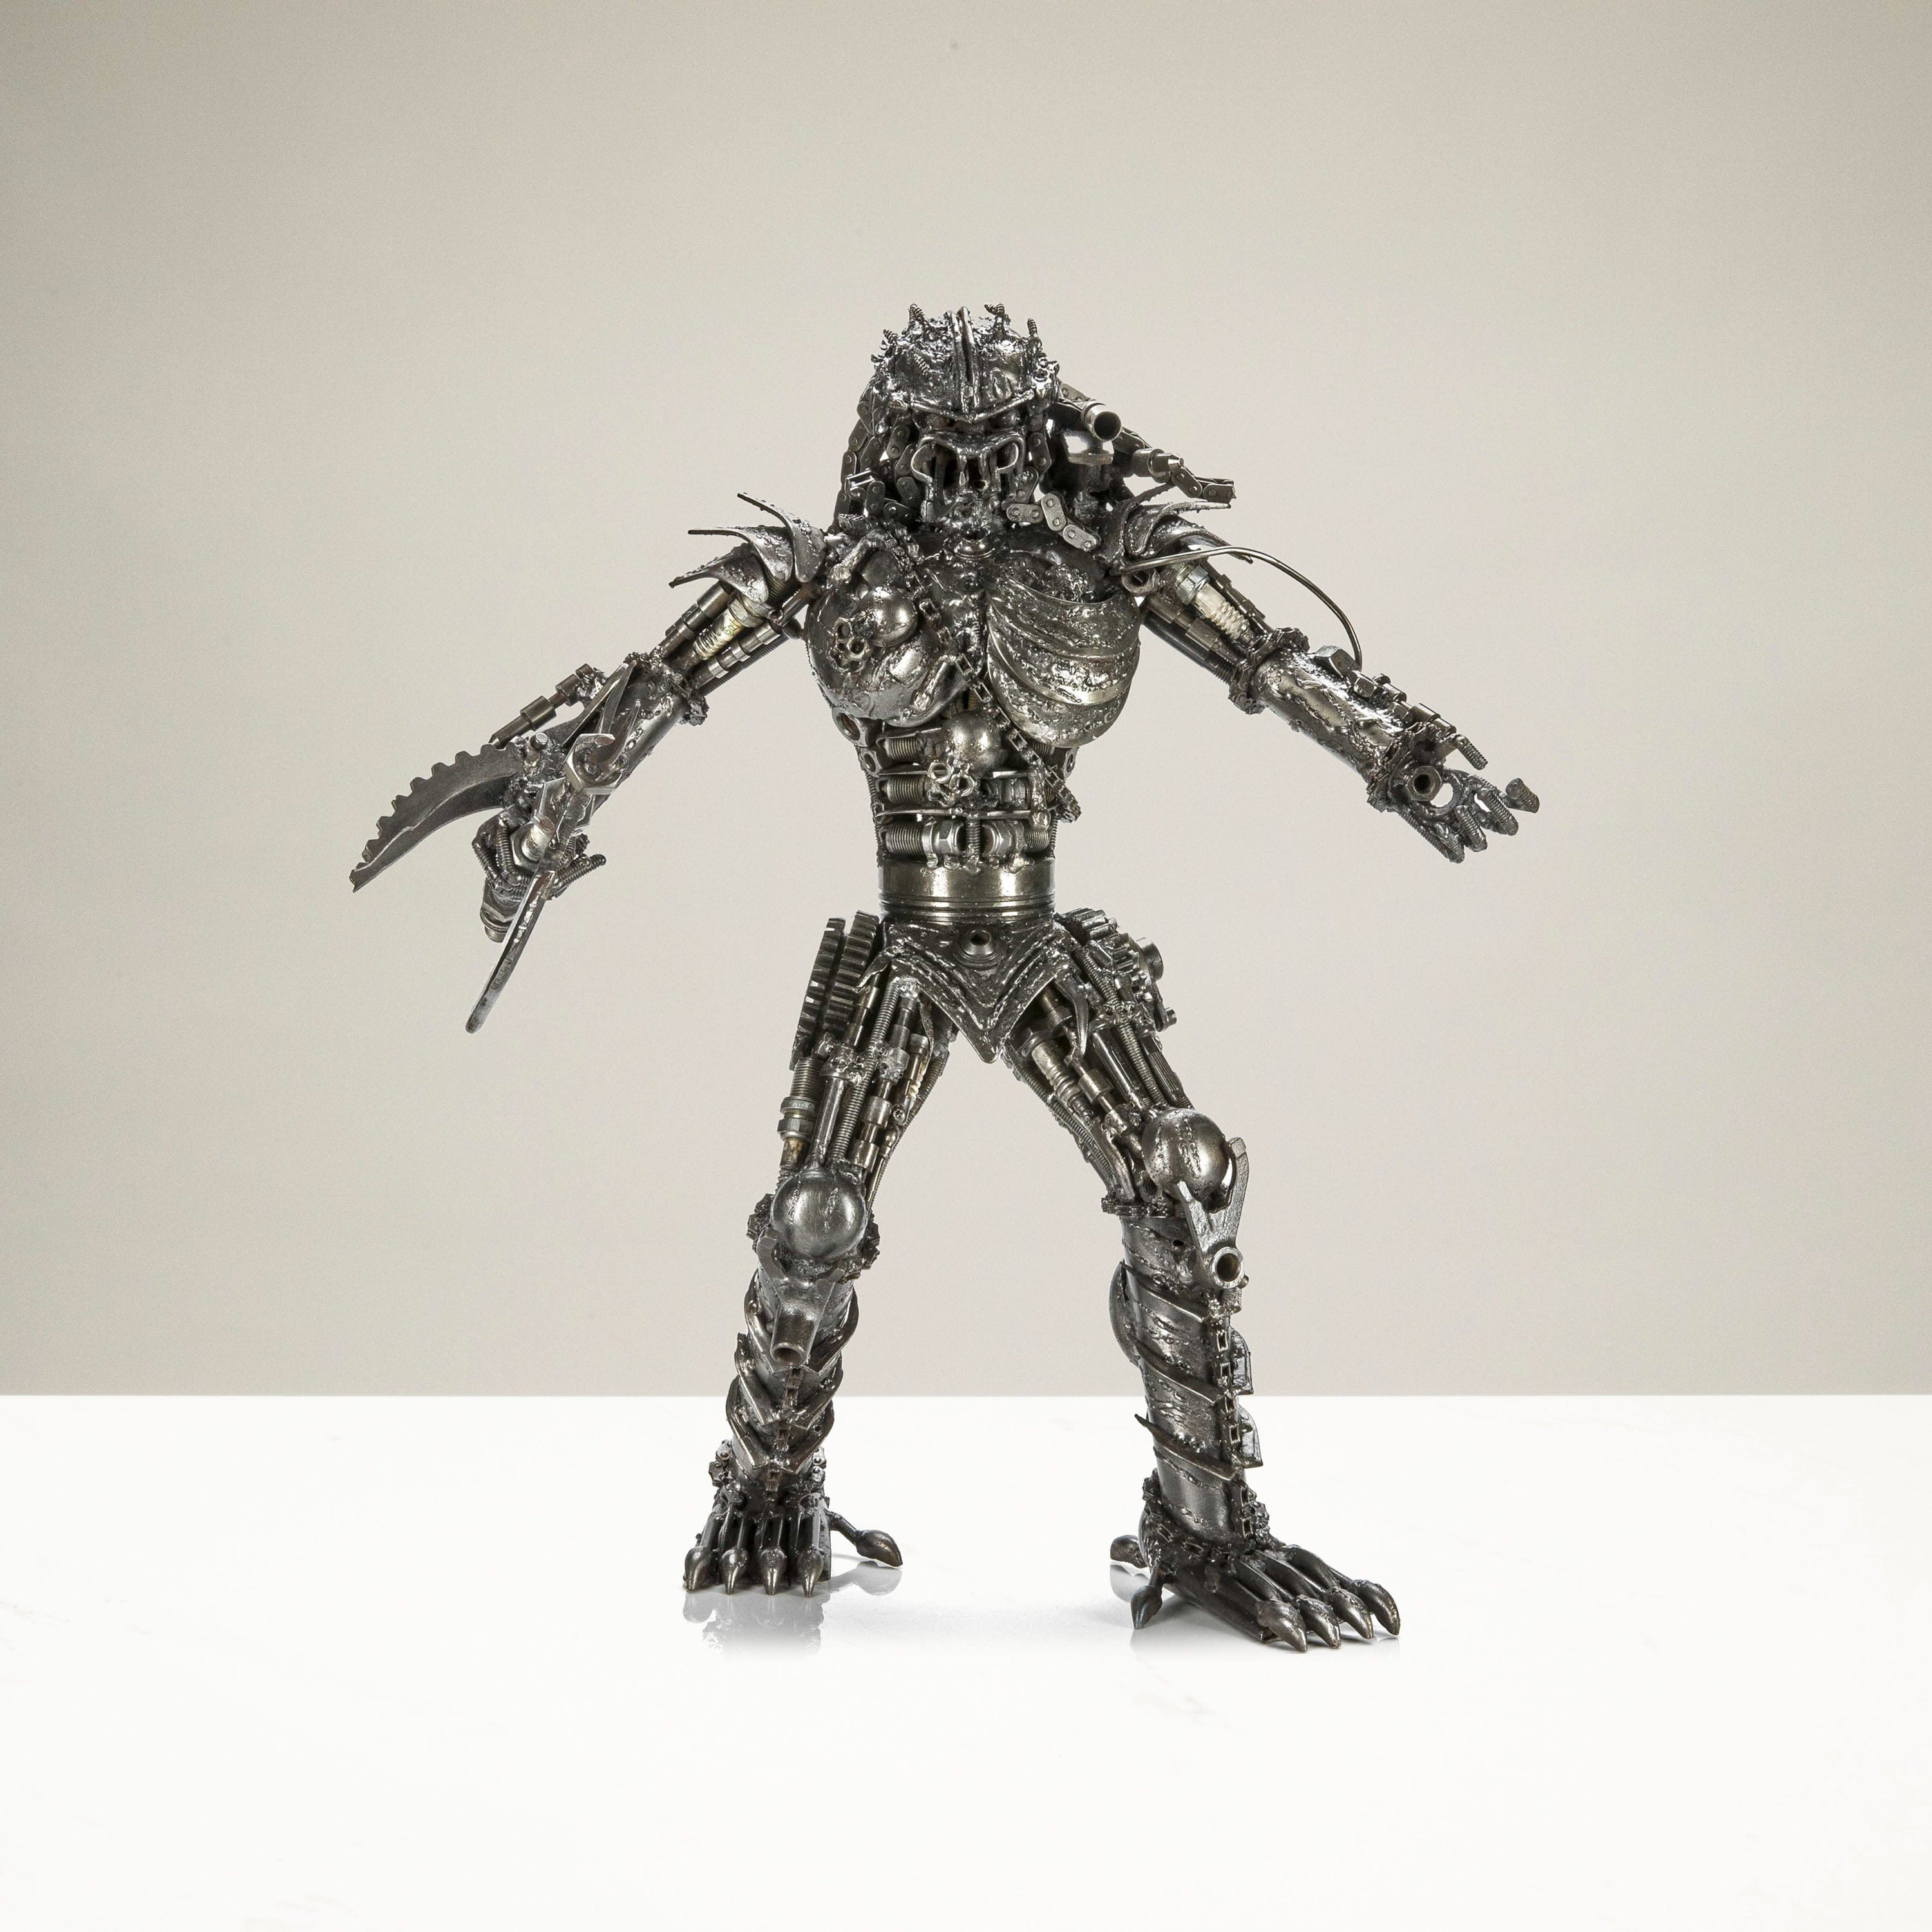 Kalifano Recycled Metal Art 23" Predator with Axe Inspired Recycled Metal Sculpture RMS-P58x41-S03